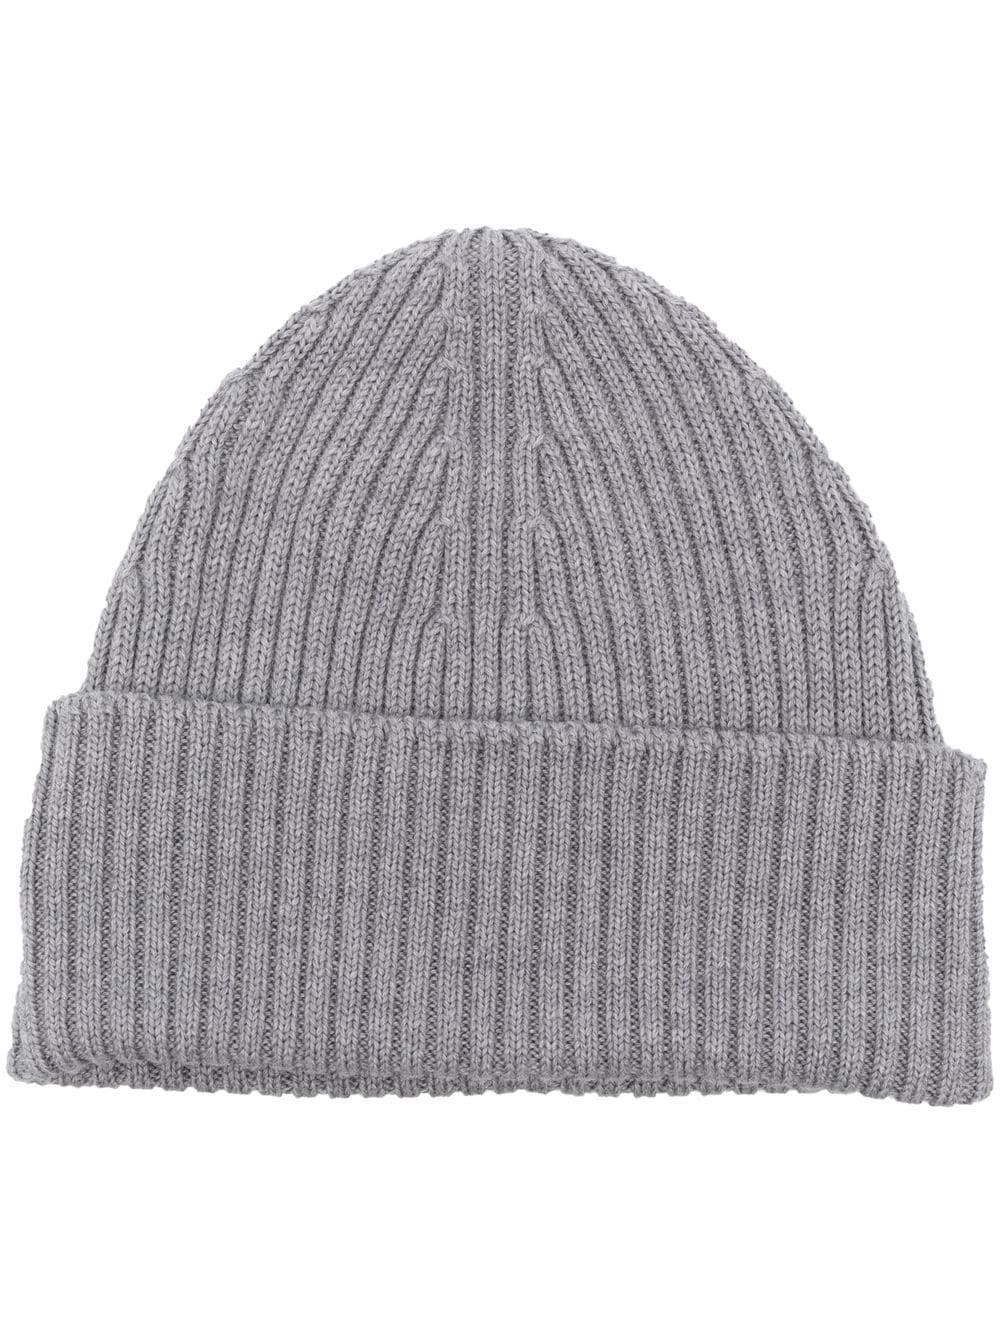 Lacoste chunky ribbed-knit beanie - Grey von Lacoste